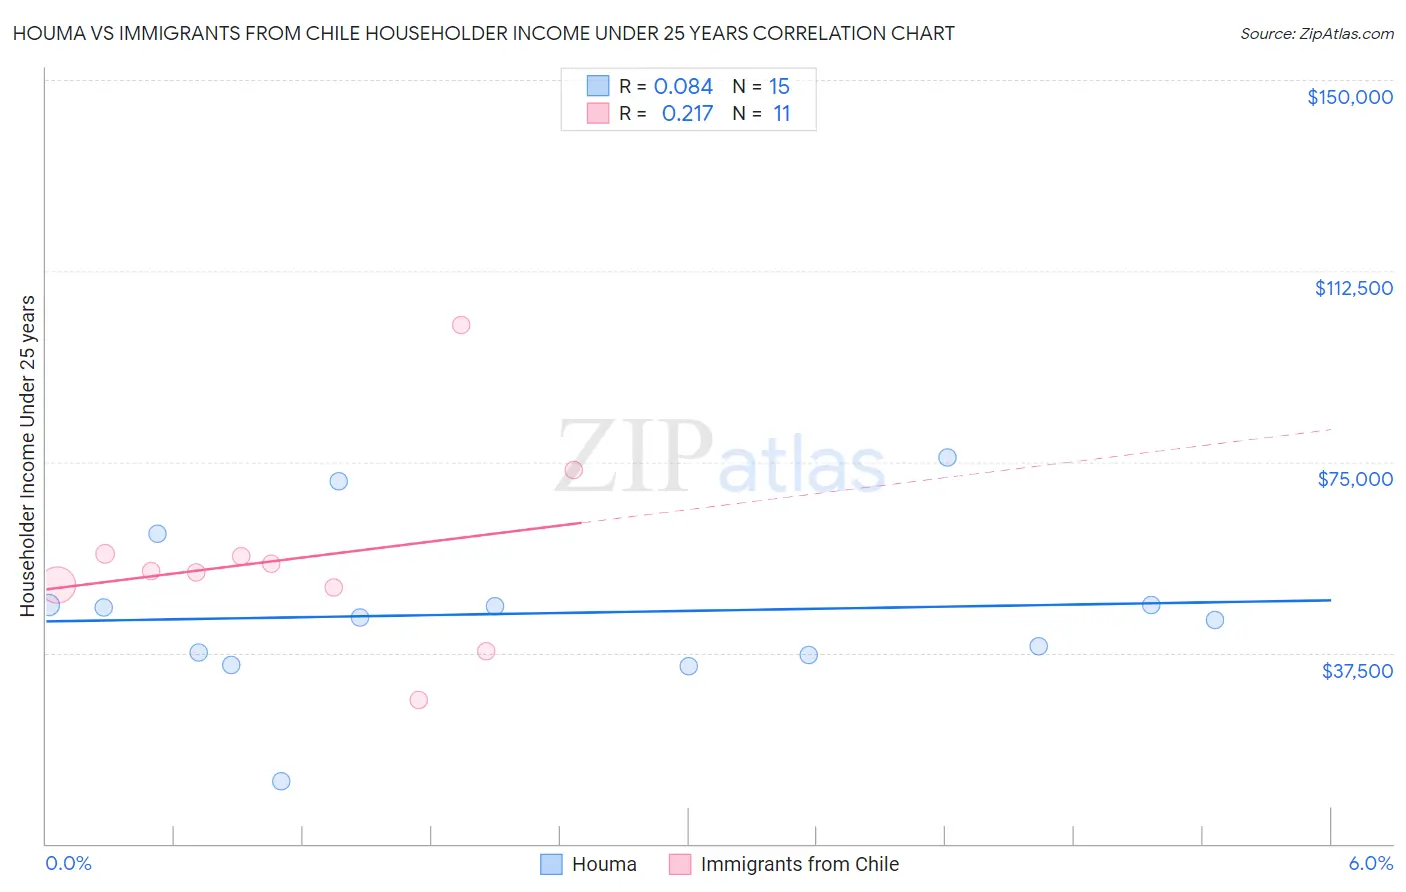 Houma vs Immigrants from Chile Householder Income Under 25 years